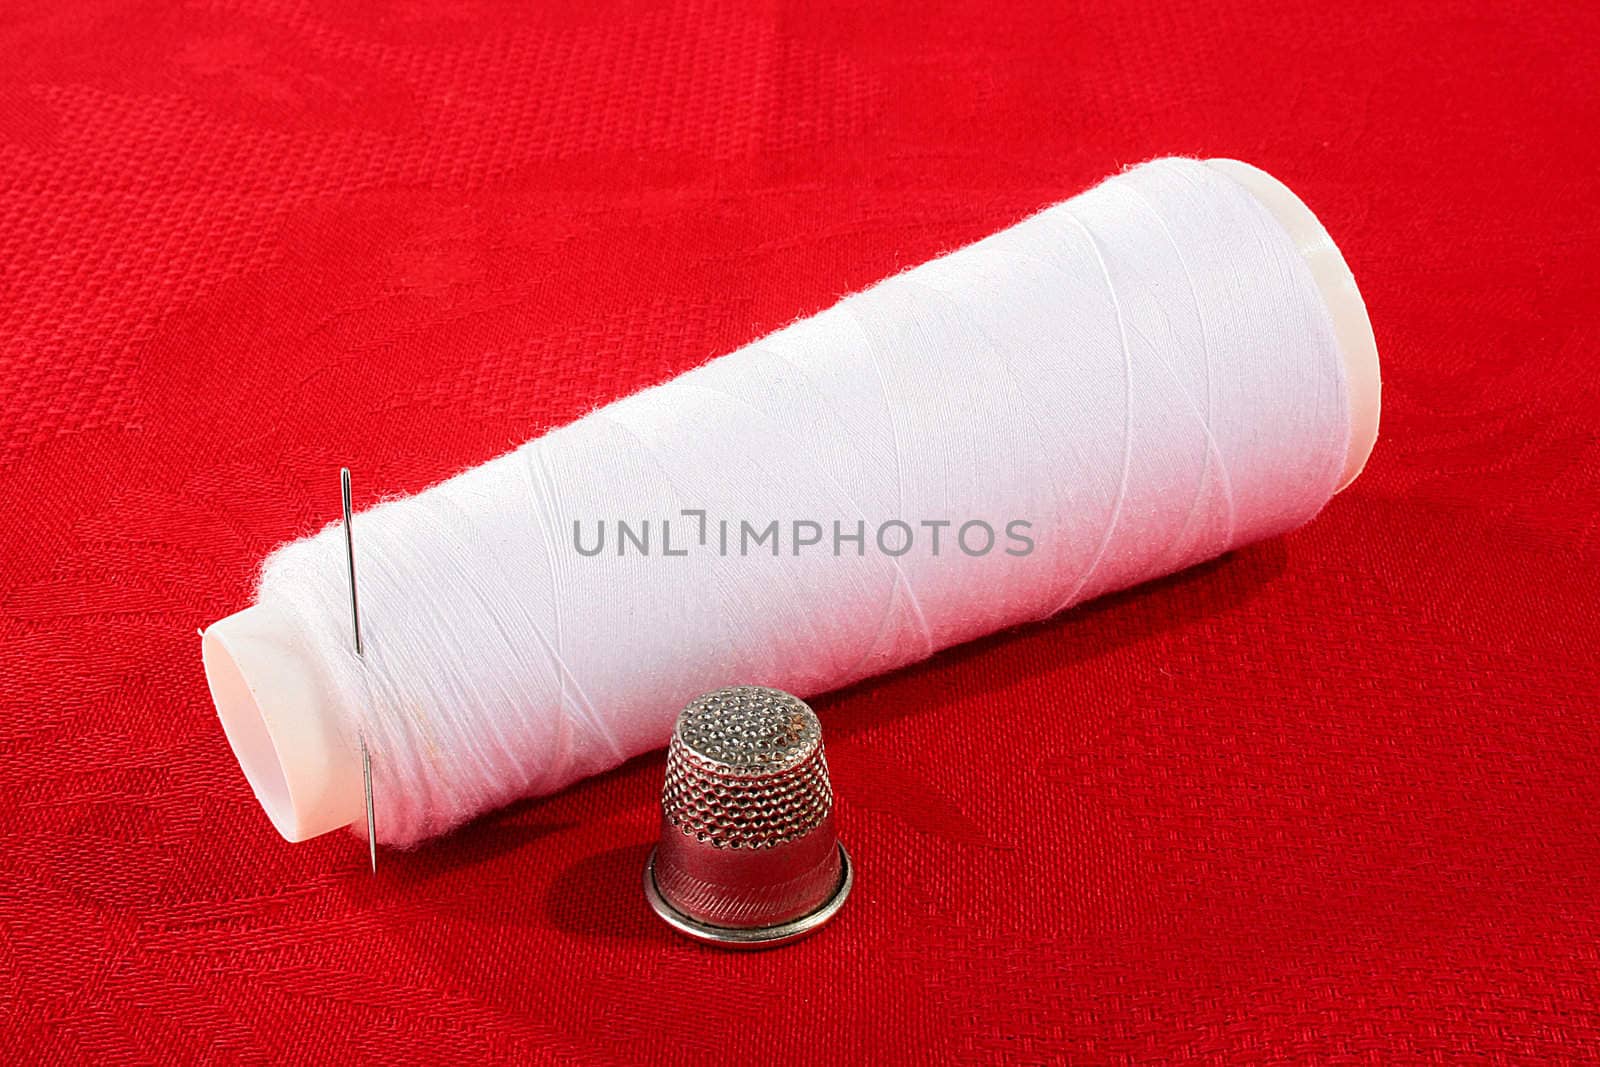 The coil with white threads and a needle on a red background, nearby a thimble for sewing.